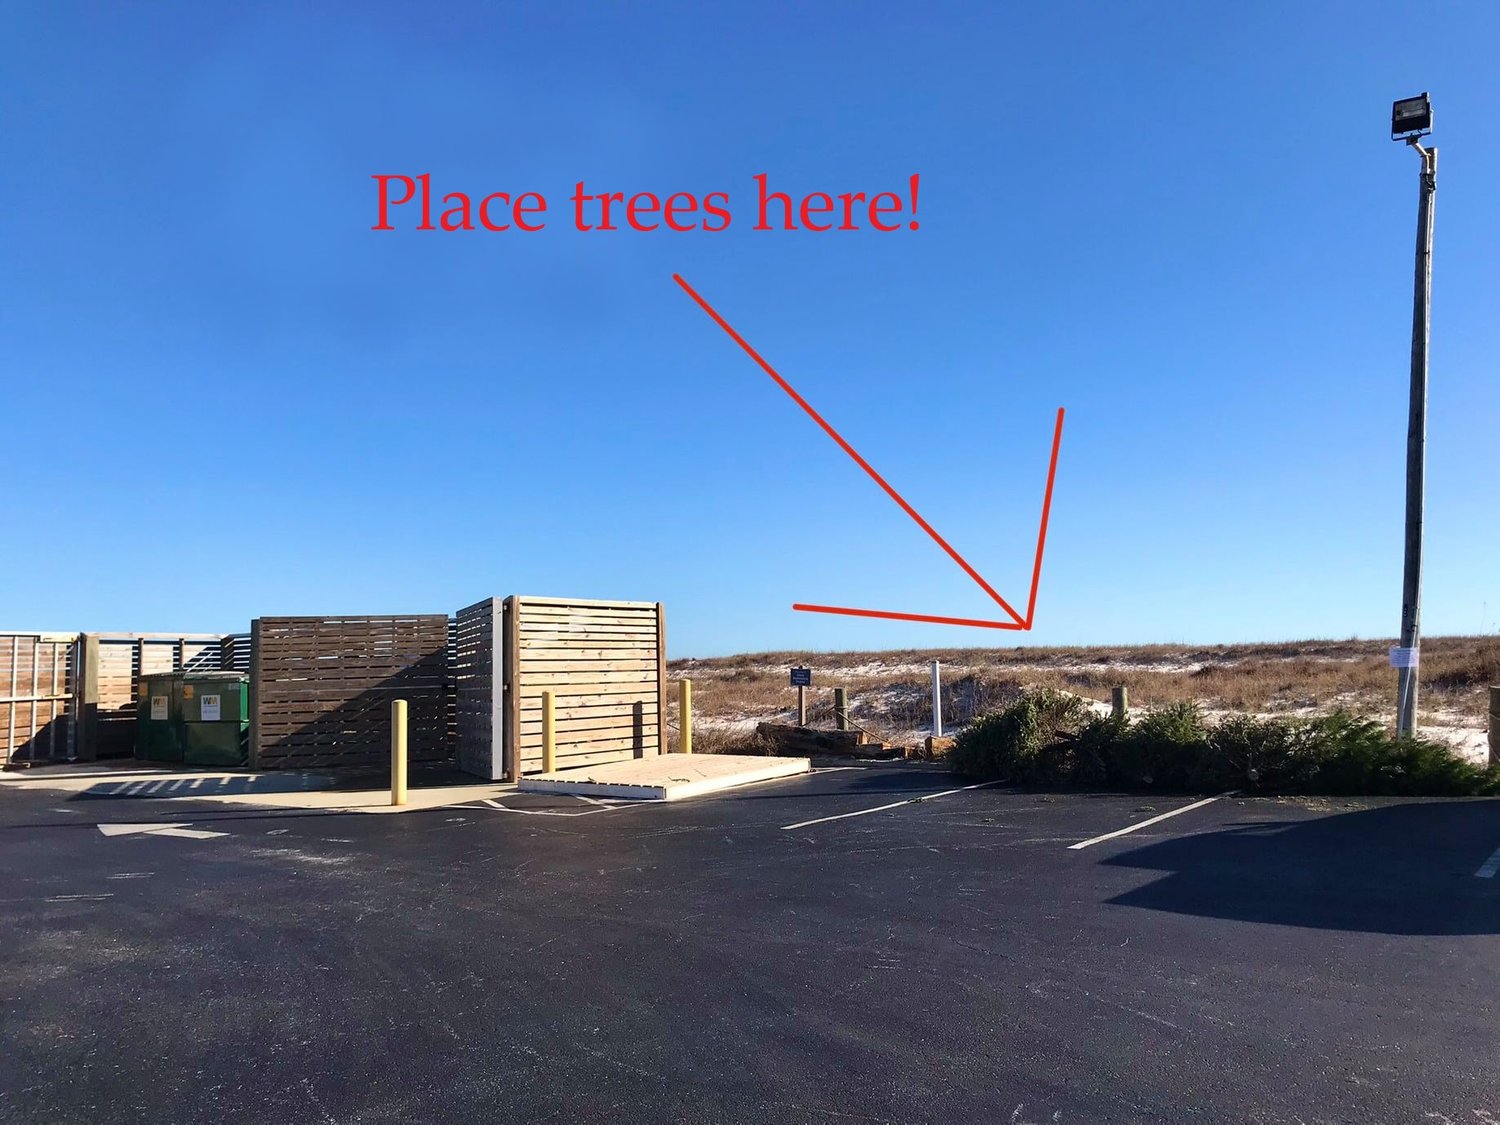 Gulf State Park staff request trees be deposited at the southeast end of the Gulf State Park Beach Pavilion parking lot near the dumpsters. Do not block the dumpsters.